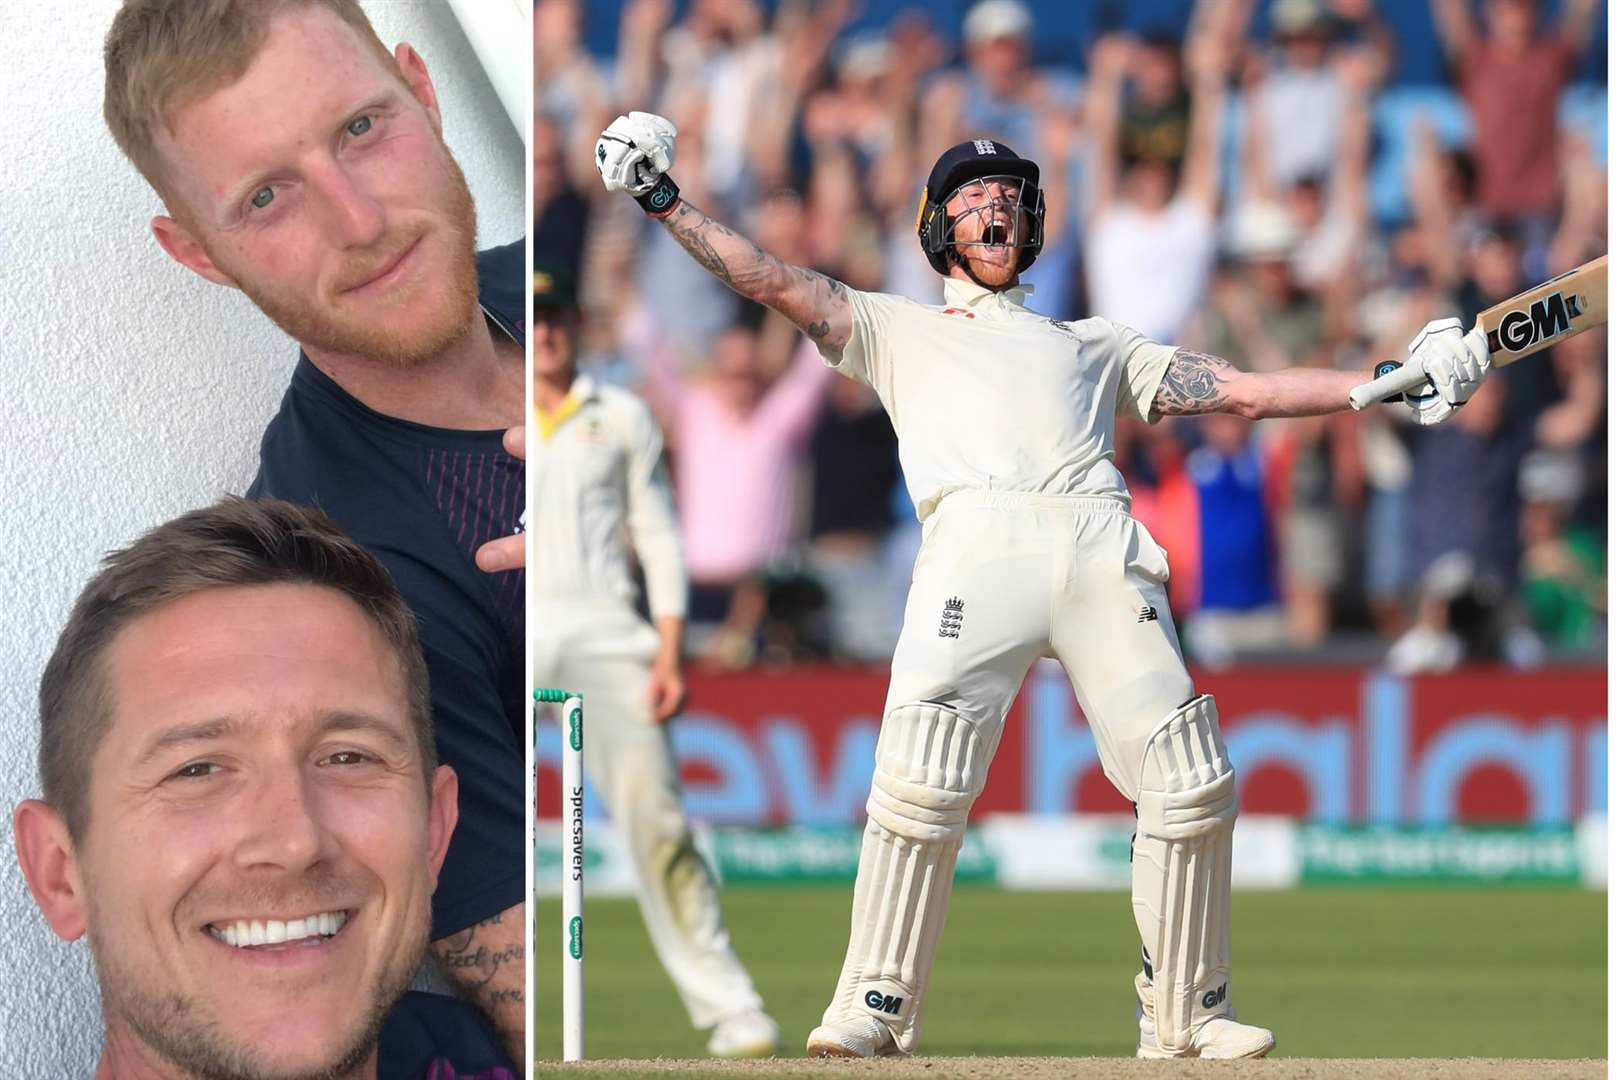 Joe Denly shared a selfie with Ben Stokes on his twitter page (15857617)